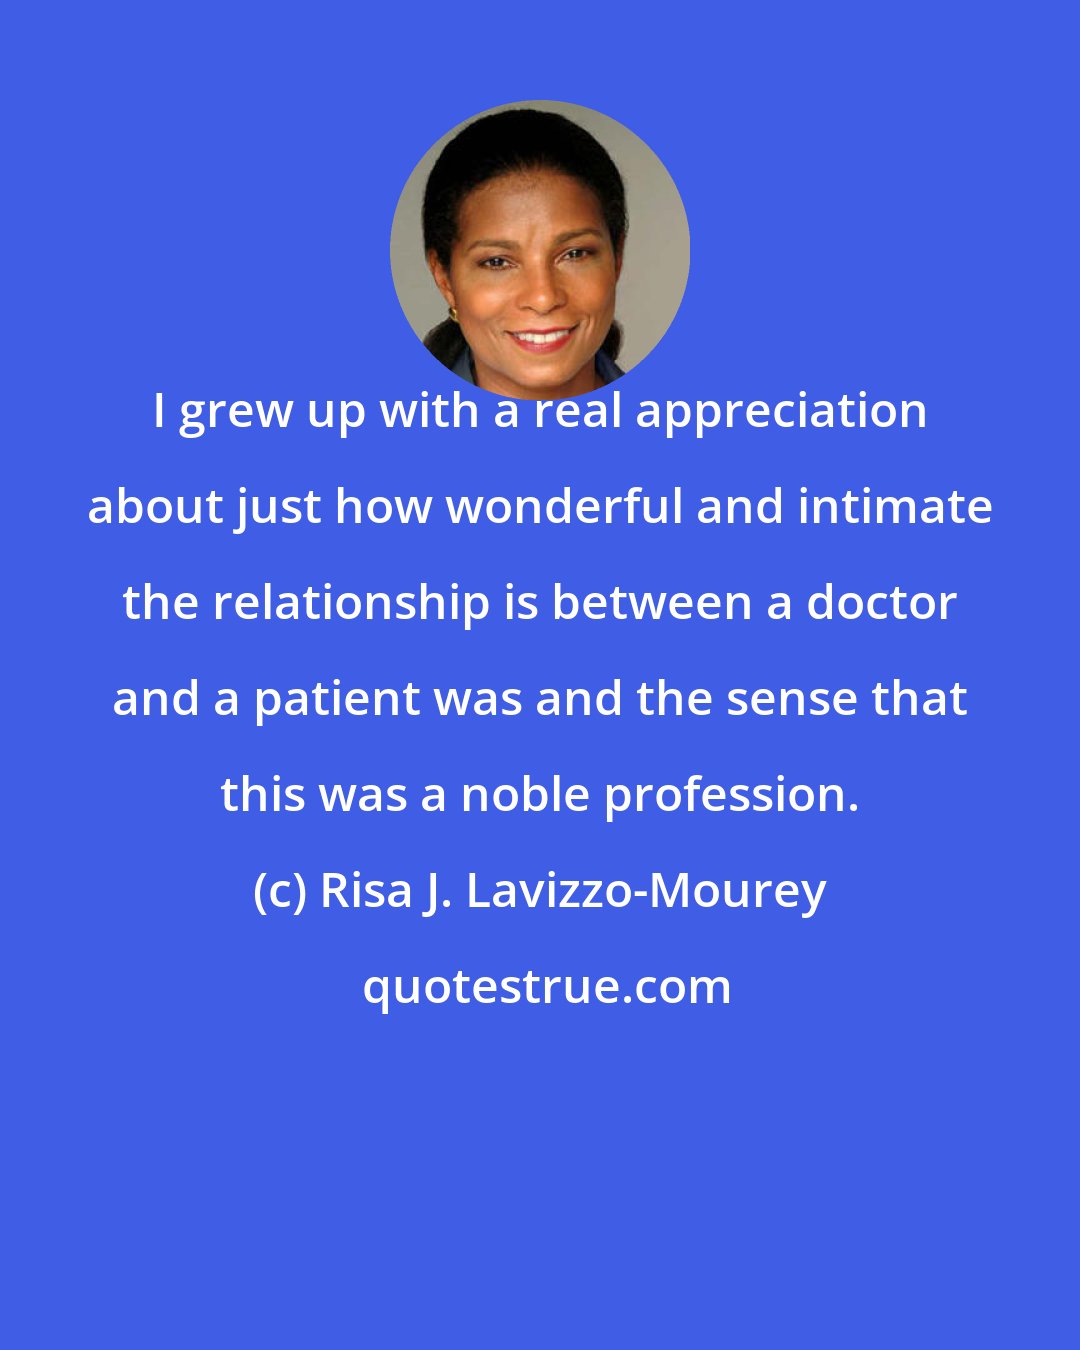 Risa J. Lavizzo-Mourey: I grew up with a real appreciation about just how wonderful and intimate the relationship is between a doctor and a patient was and the sense that this was a noble profession.